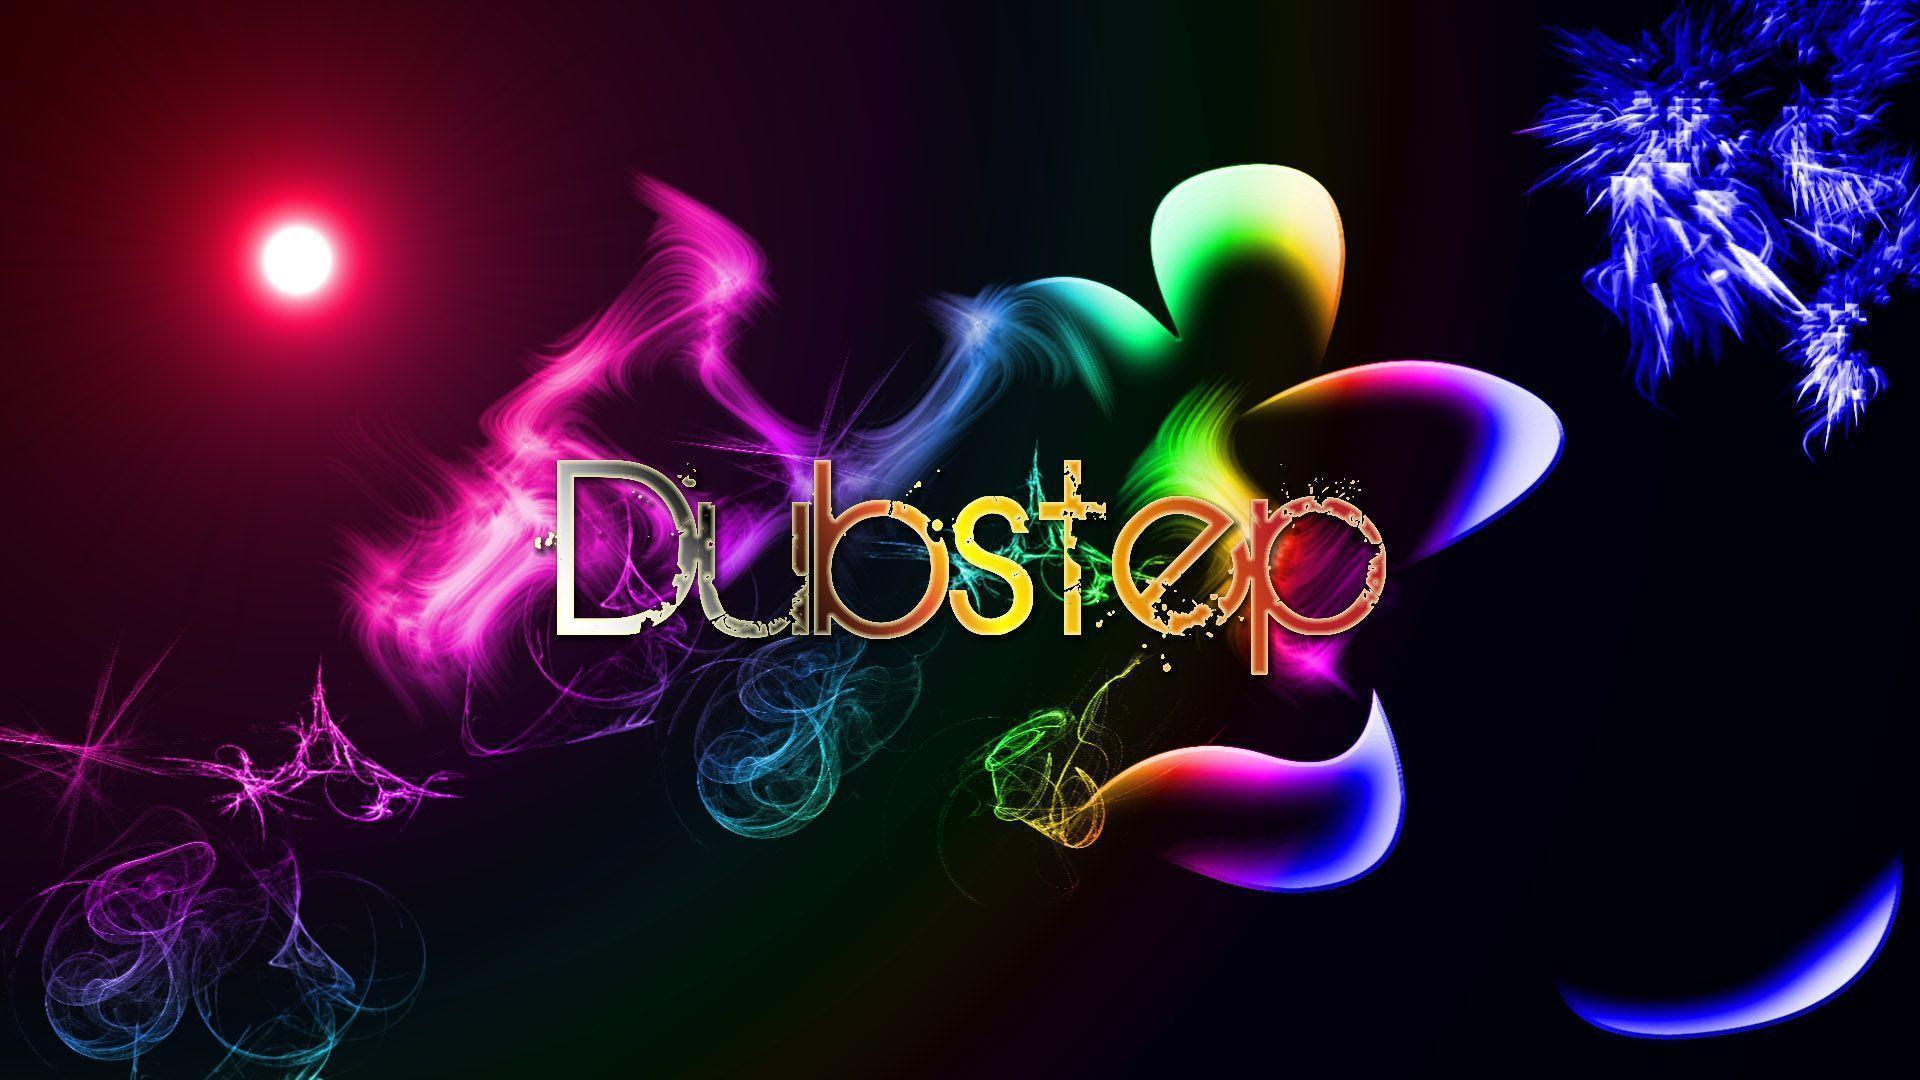 Dubstep Electronic Music Wallpapers Wide or HD